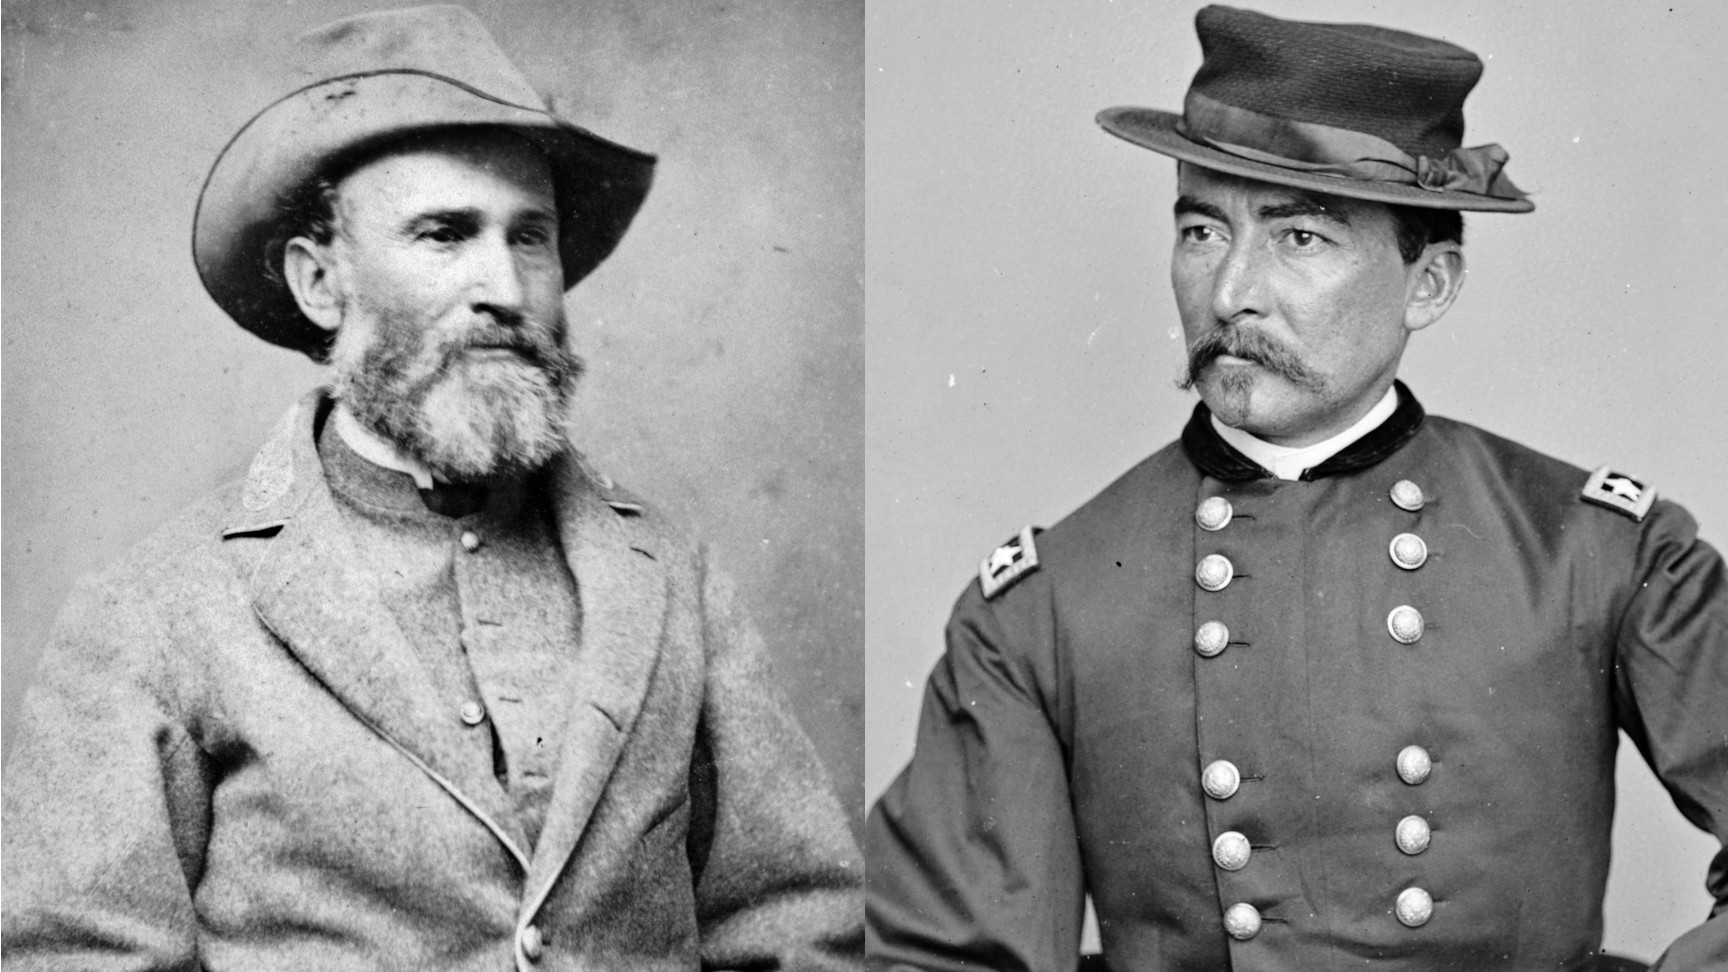 Confederate General Jubal Early, left, and Union General Philip Sheridan. In the Shenandoah Valley Campaign of 1864, Sheridan was put in command by Grant in August and defeated Early at Fisher’s Hill and Tom’s Brook. Early’s surprise attack on October 19 smashed two thirds of the Union force there and sent them running. But Early’s exhausted and hungry troops—due largely to Sheridan’s “scorched earth” tactic of burning crops and seizing livestock—stopped to raid the Union camp. Sheridan was at Winchester when he got word of the attack and rode to rally his men, who turned and routed the Confederates. 